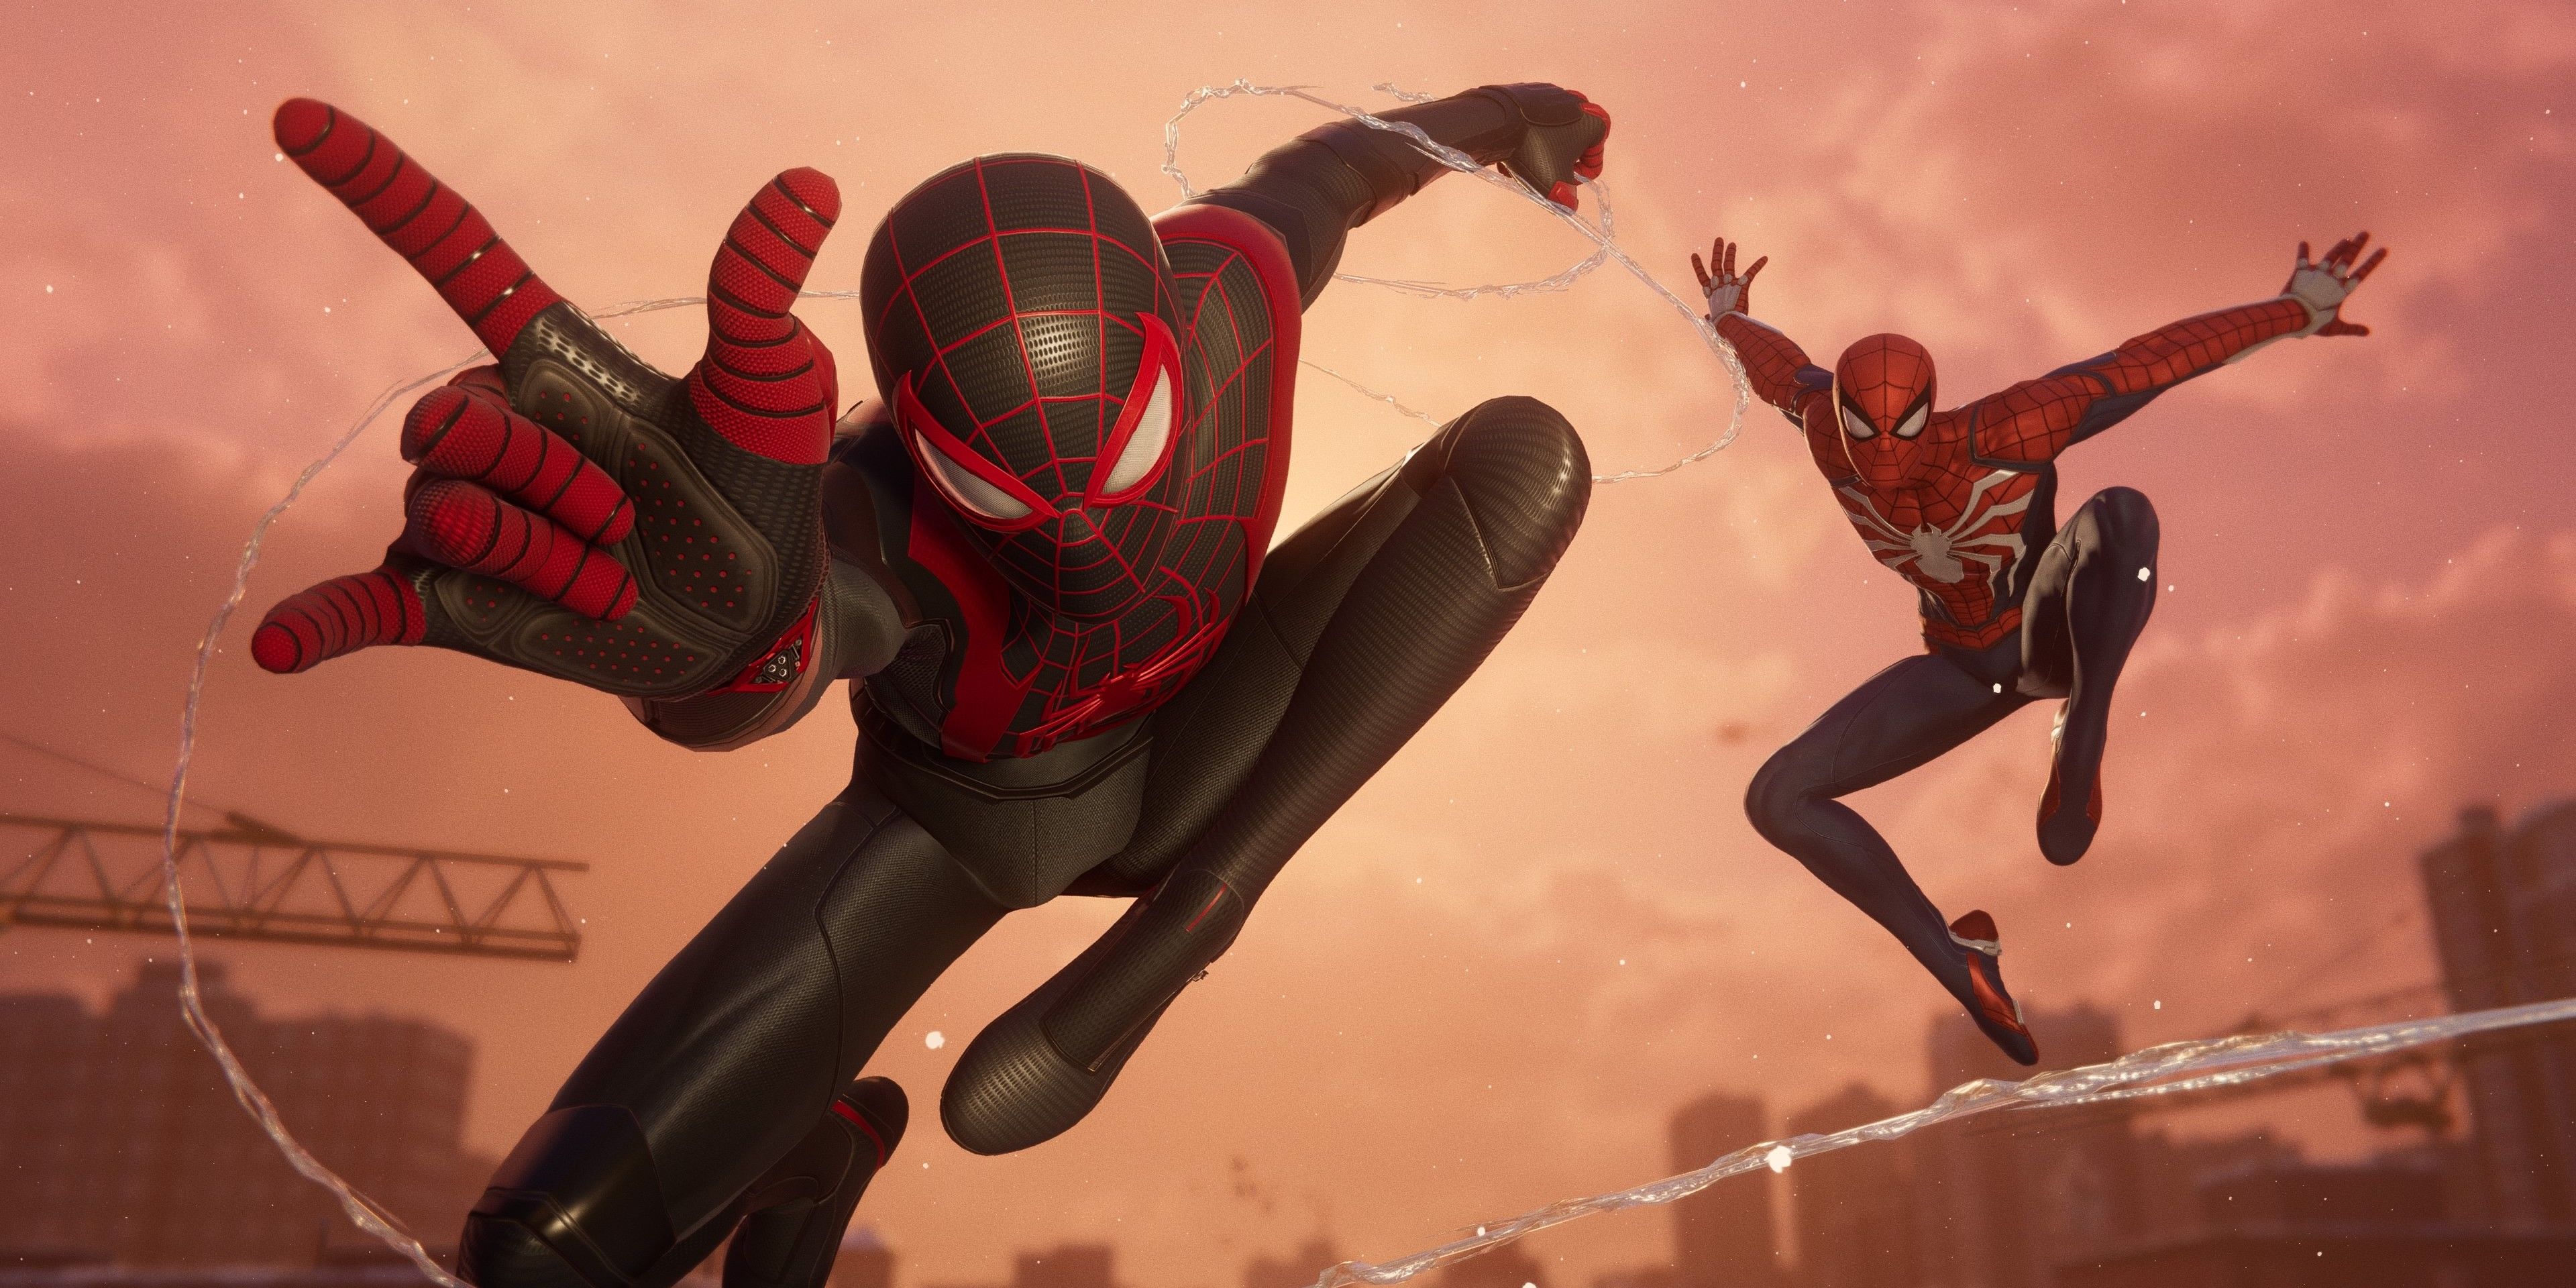 How long is Marvel's Spider-Man: Miles Morales?